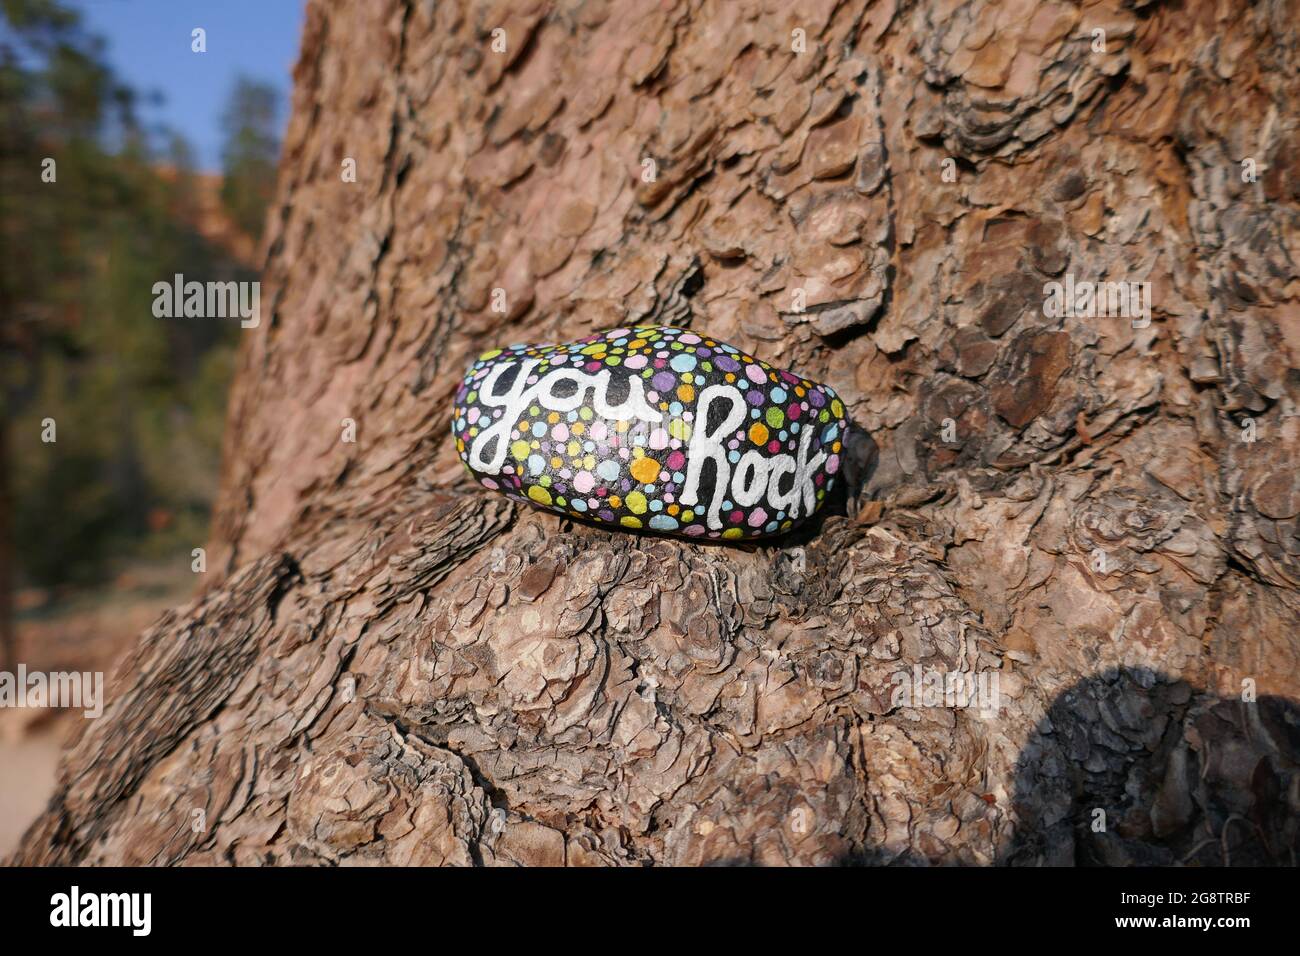 Tree trunk with rough bark and painted kindness rock Stock Photo